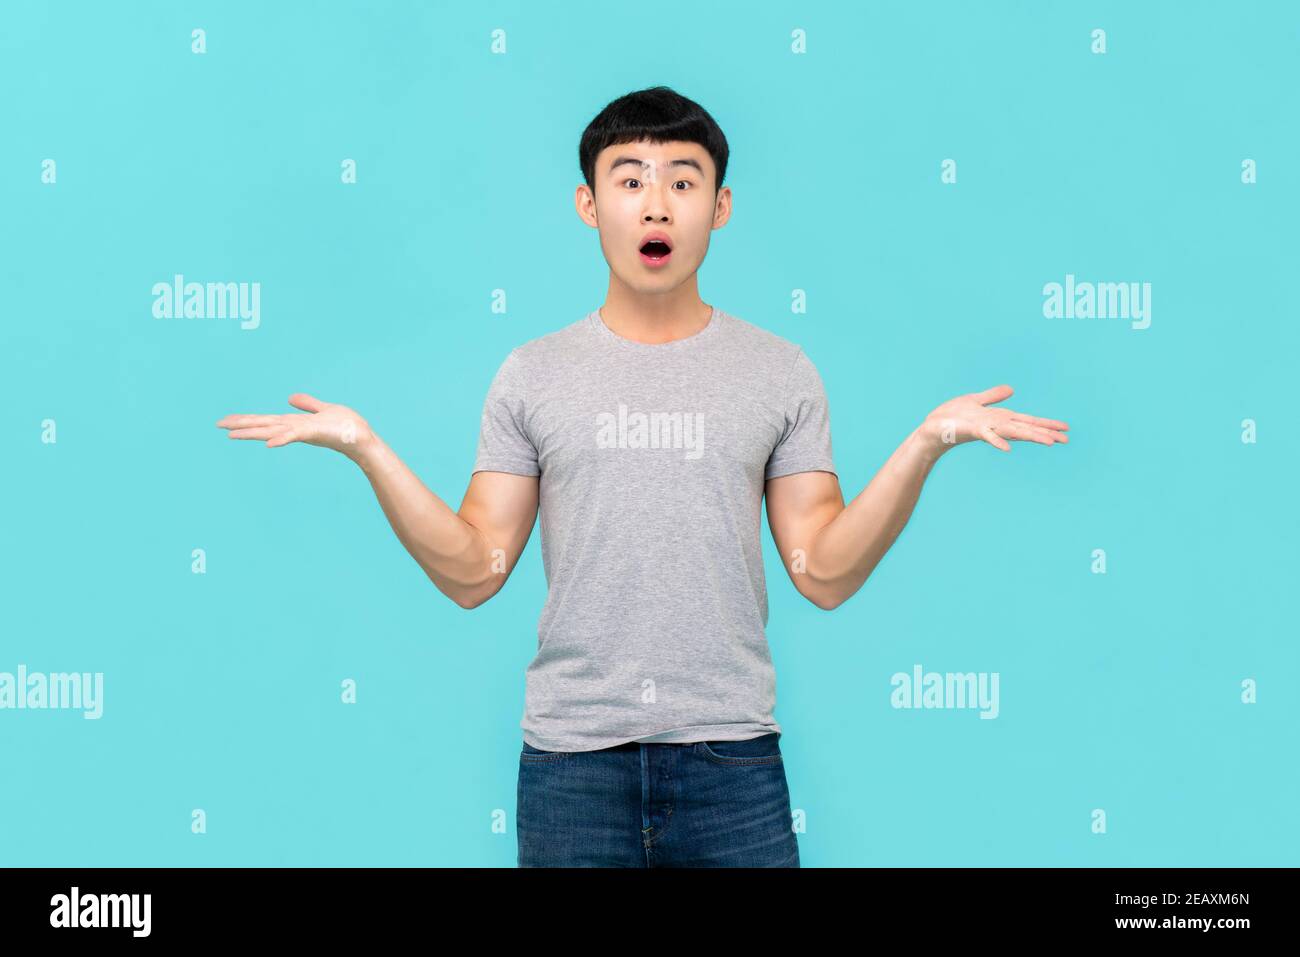 Shocked young Asian man frustratedly questioning and being doubtful isolated on light blue background Stock Photo